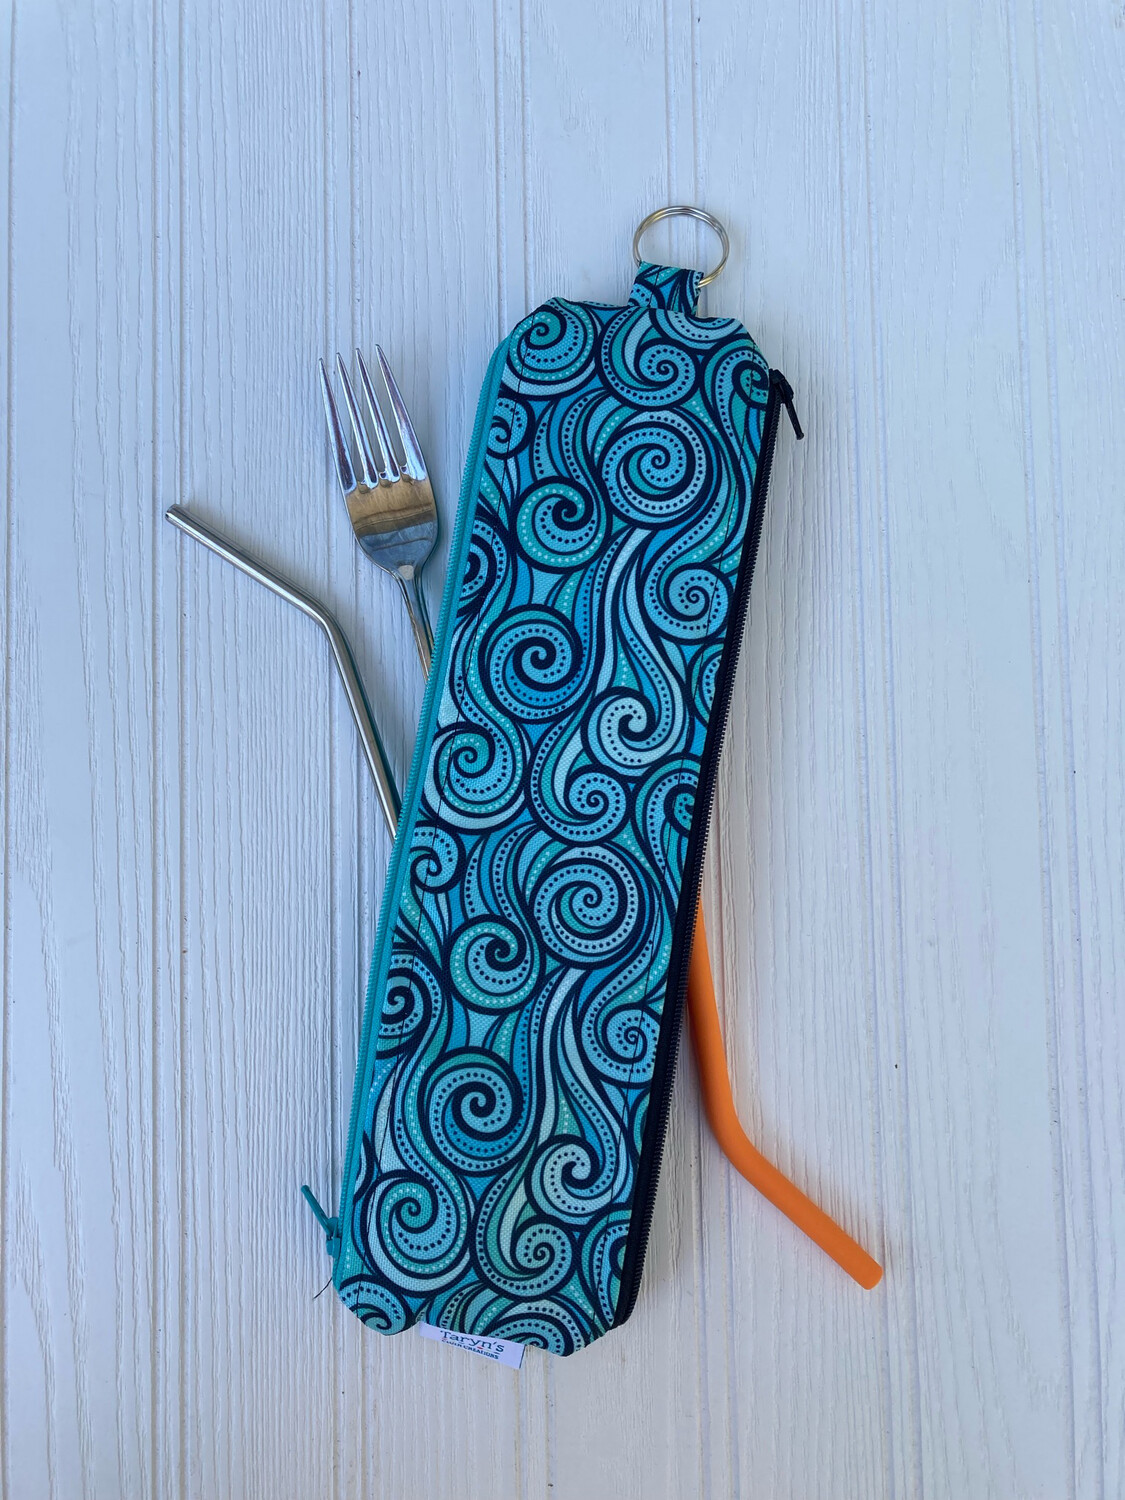 Reusable Straw Bag, double sided -Waves